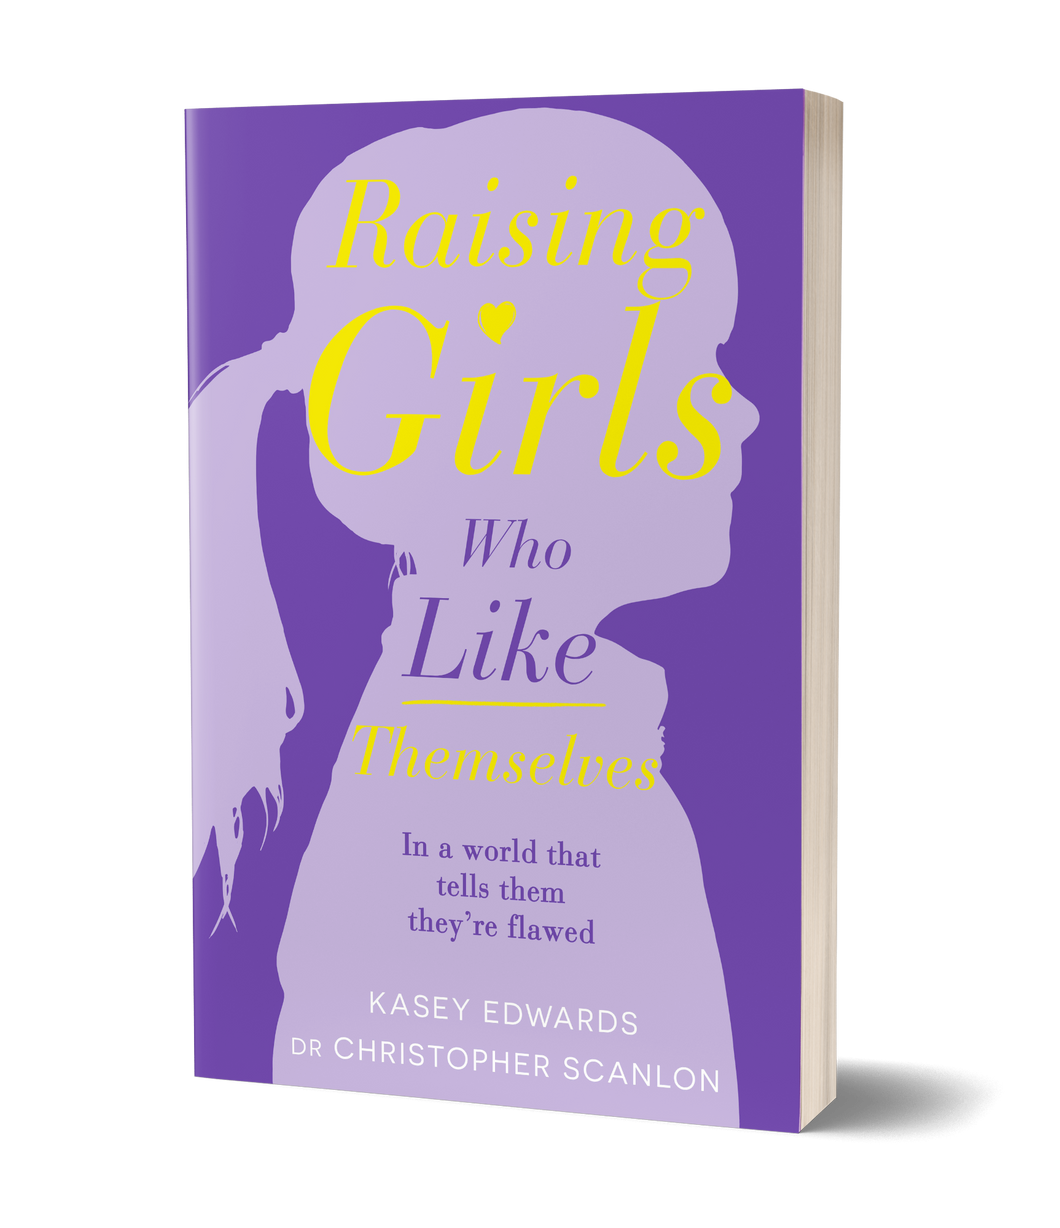 Order Raising Girls Who Like Themselves now for bonus online mini-course to handle teasing and criticism